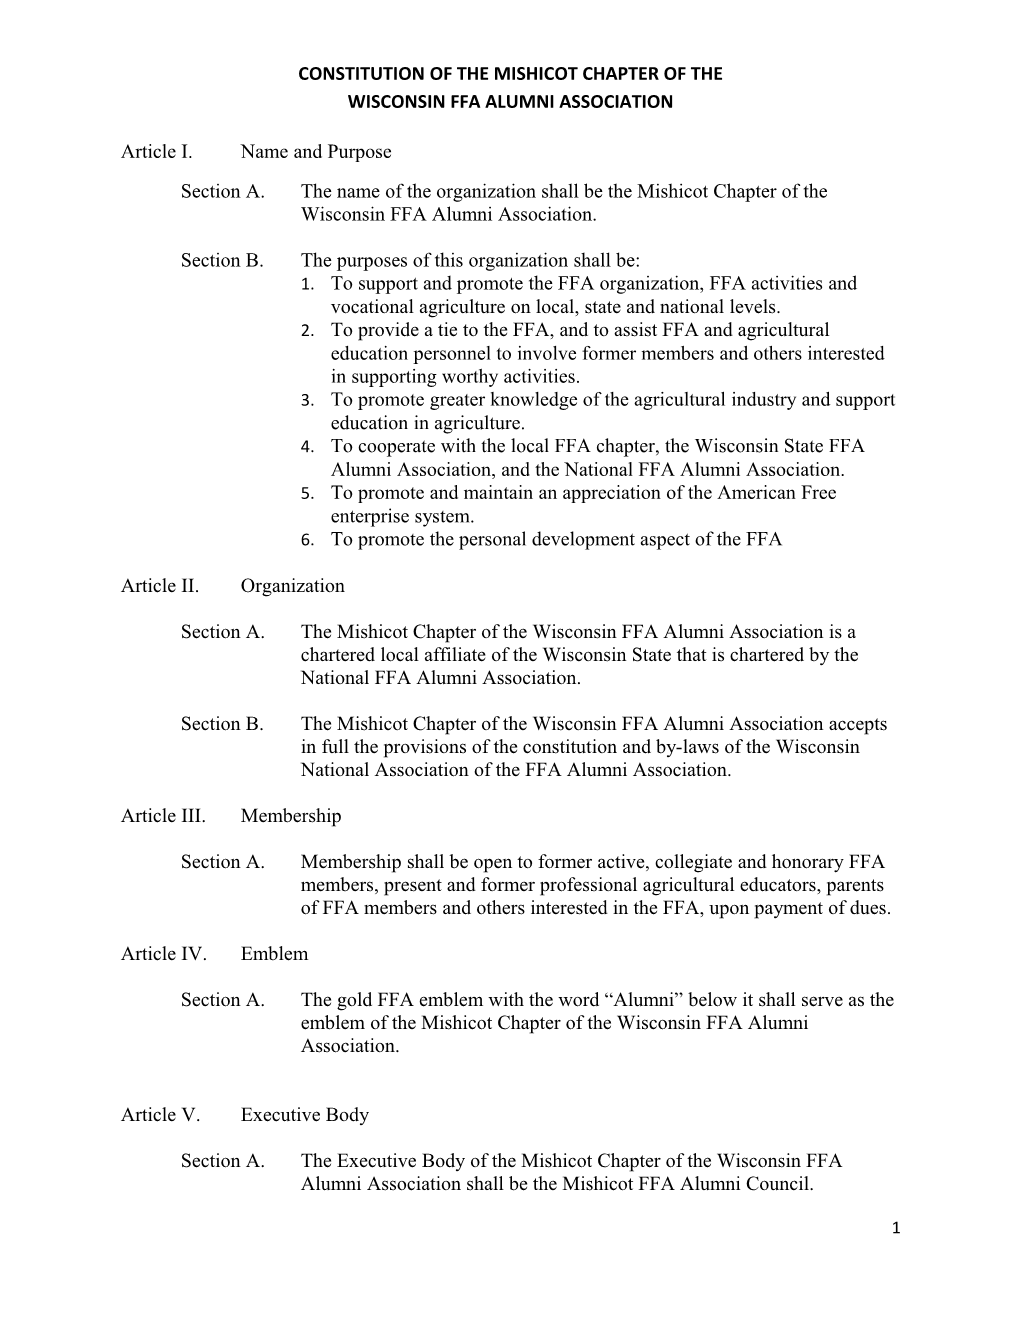 Constitution of the Mishicot Chapter of the Wisconsin Ffa Alumni Association